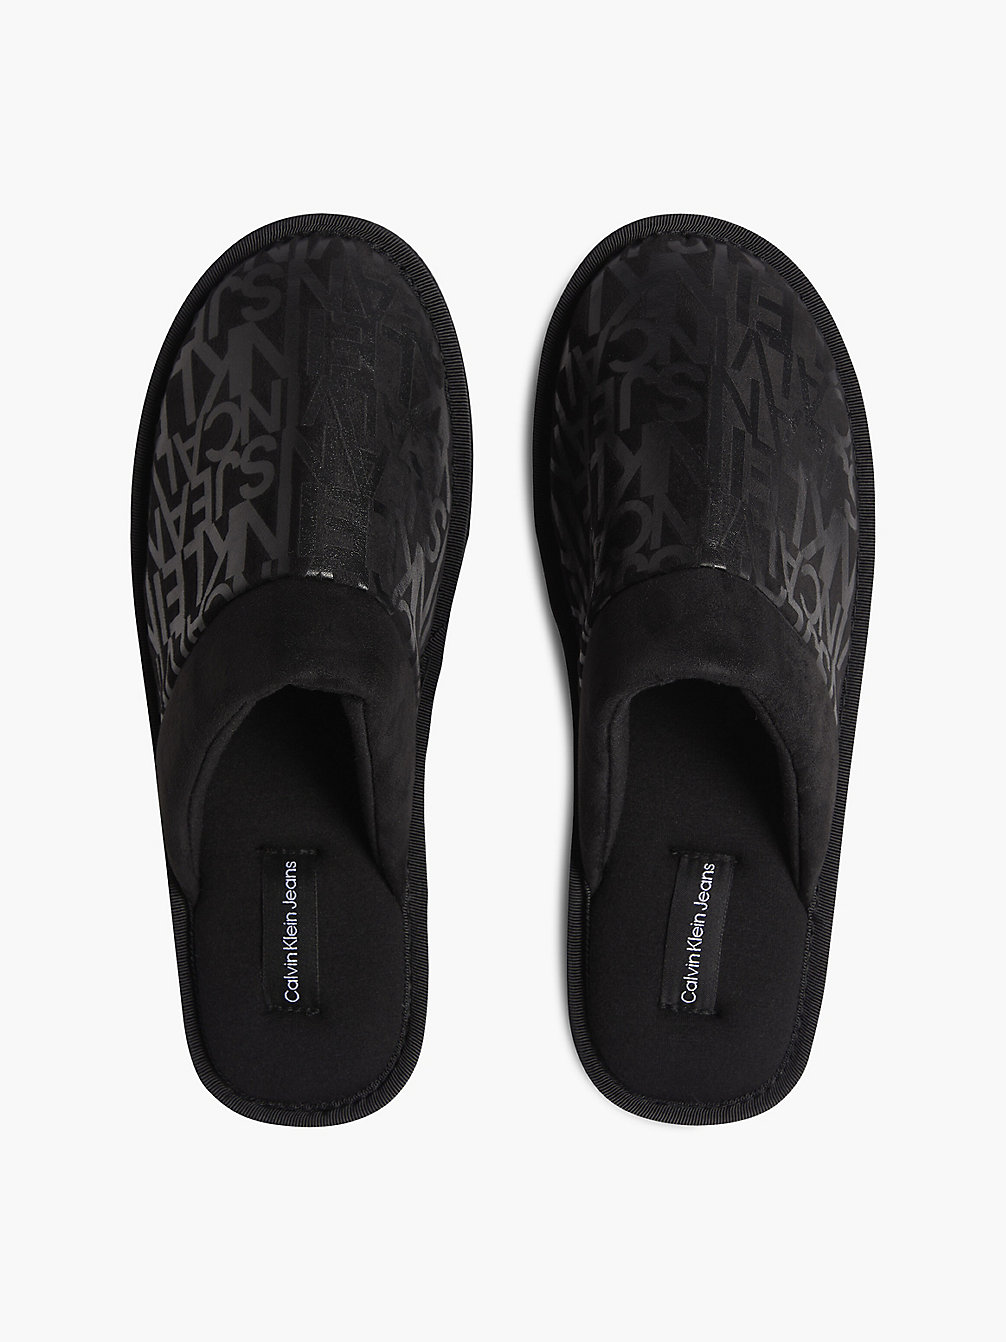 BLACK Chaussons Recyclés undefined hommes Calvin Klein